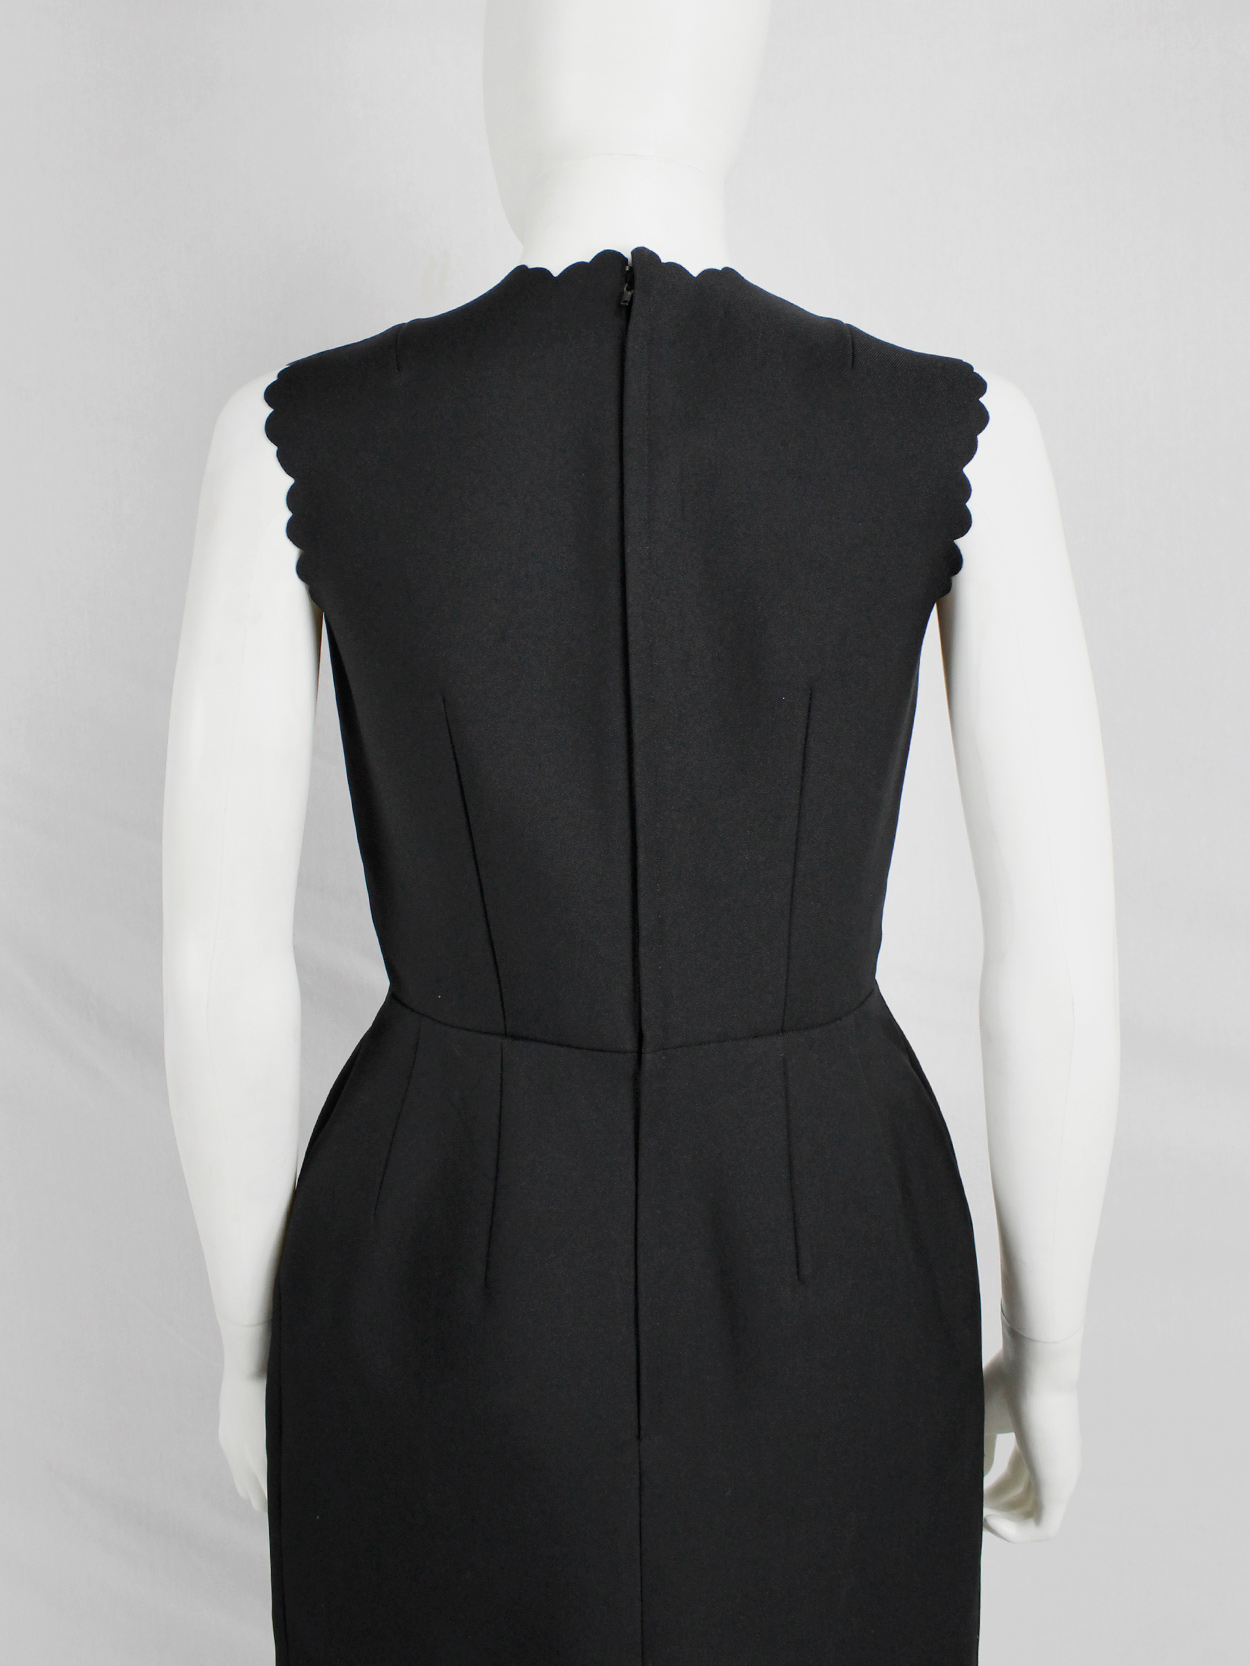 vintage Comme des Garcons black dress with scalloped edges and wider hips spring 1999 (10)